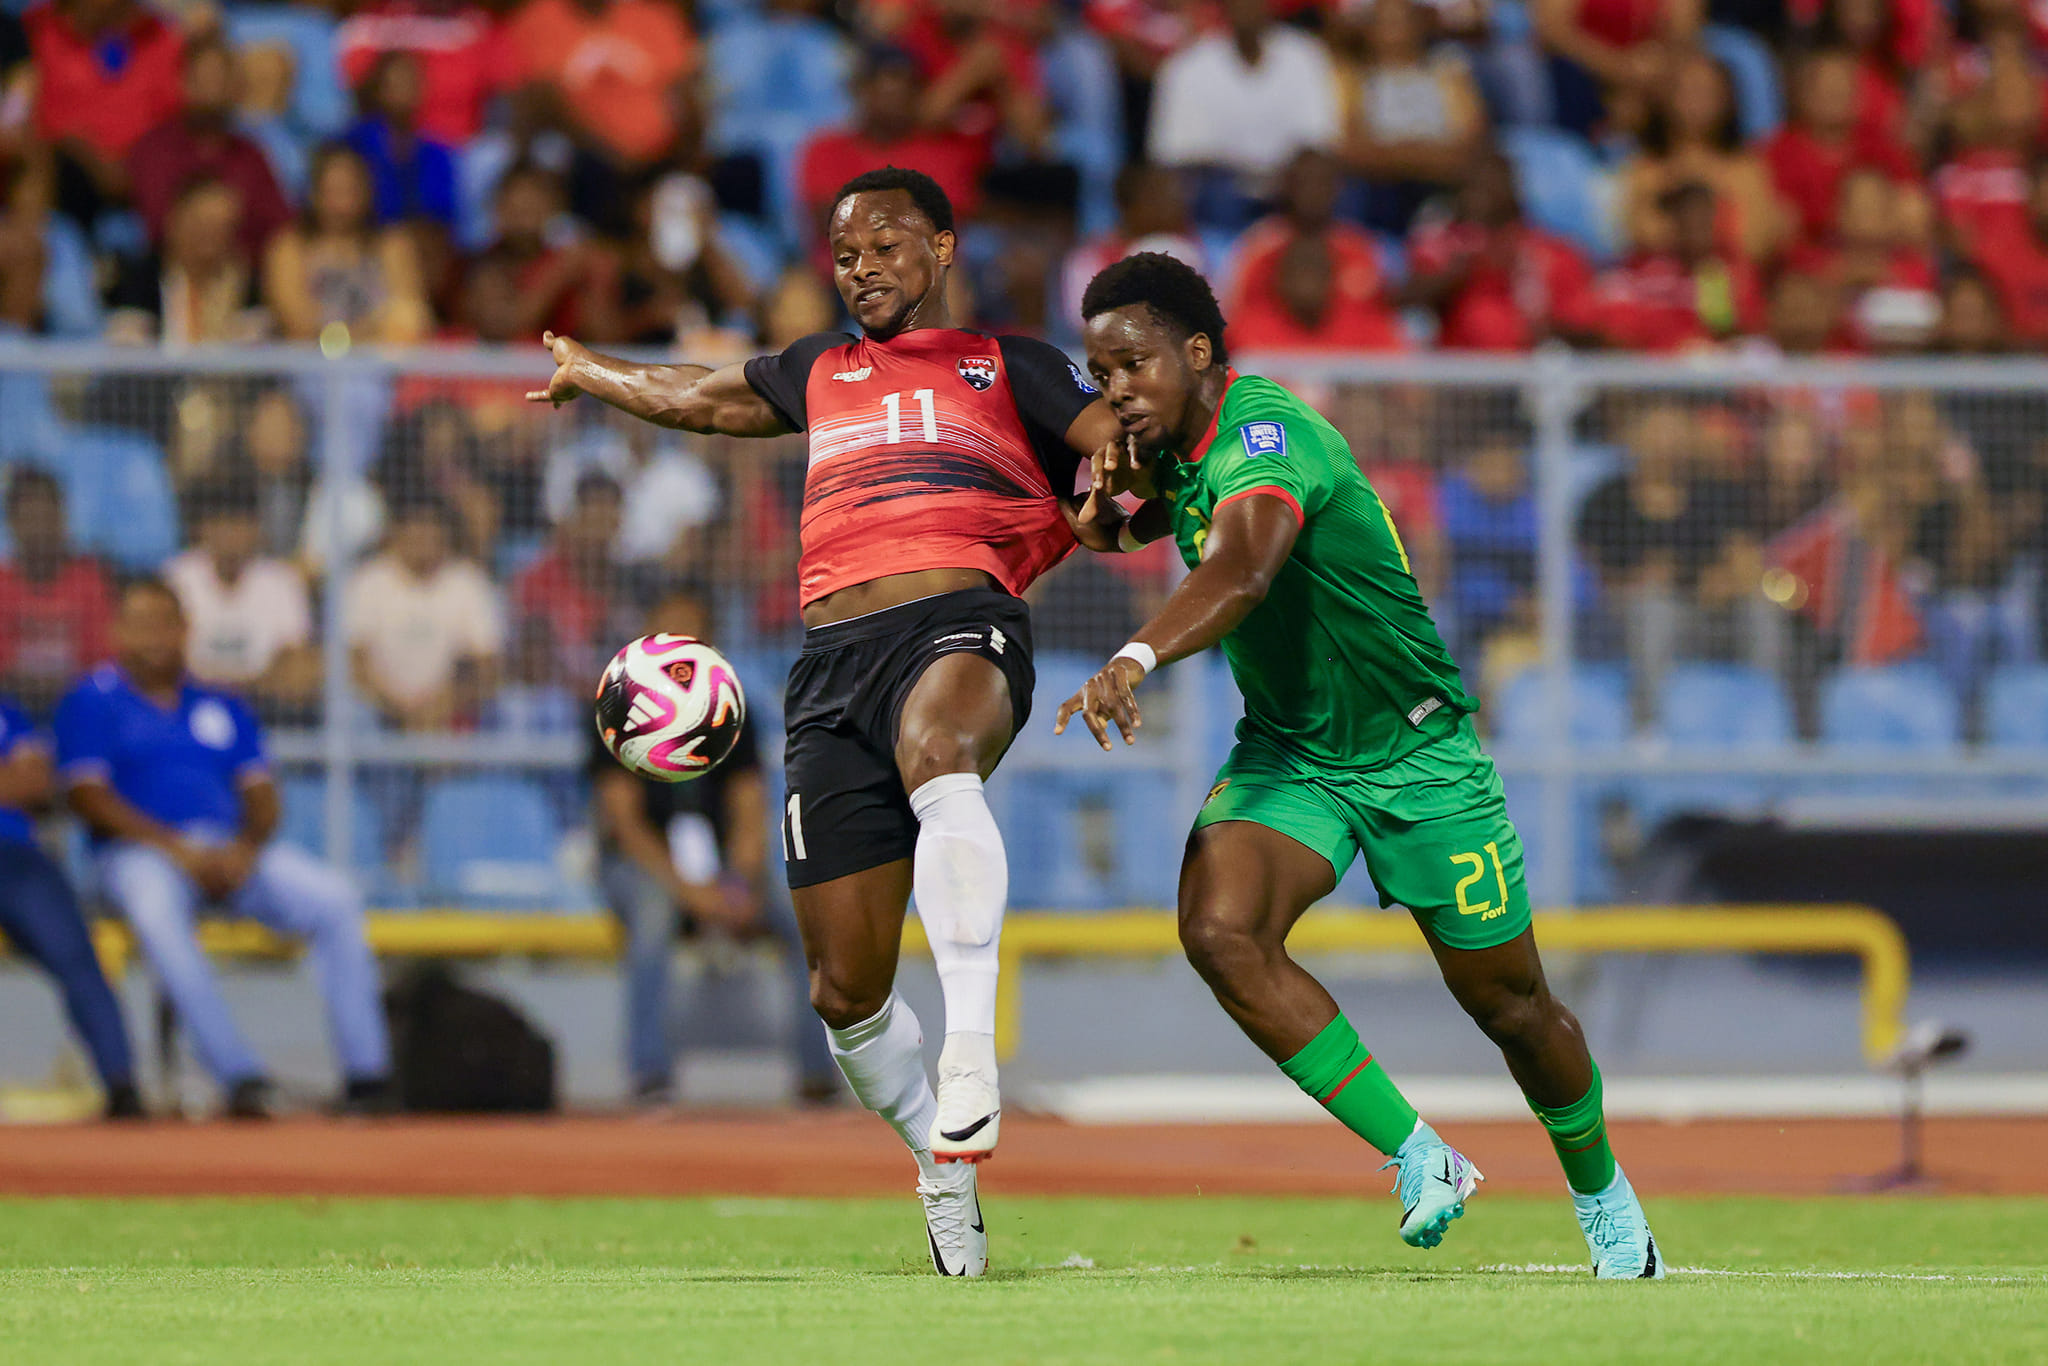 TT draw 2-2 with Grenada in second round of Concacaf World Cup qualifying